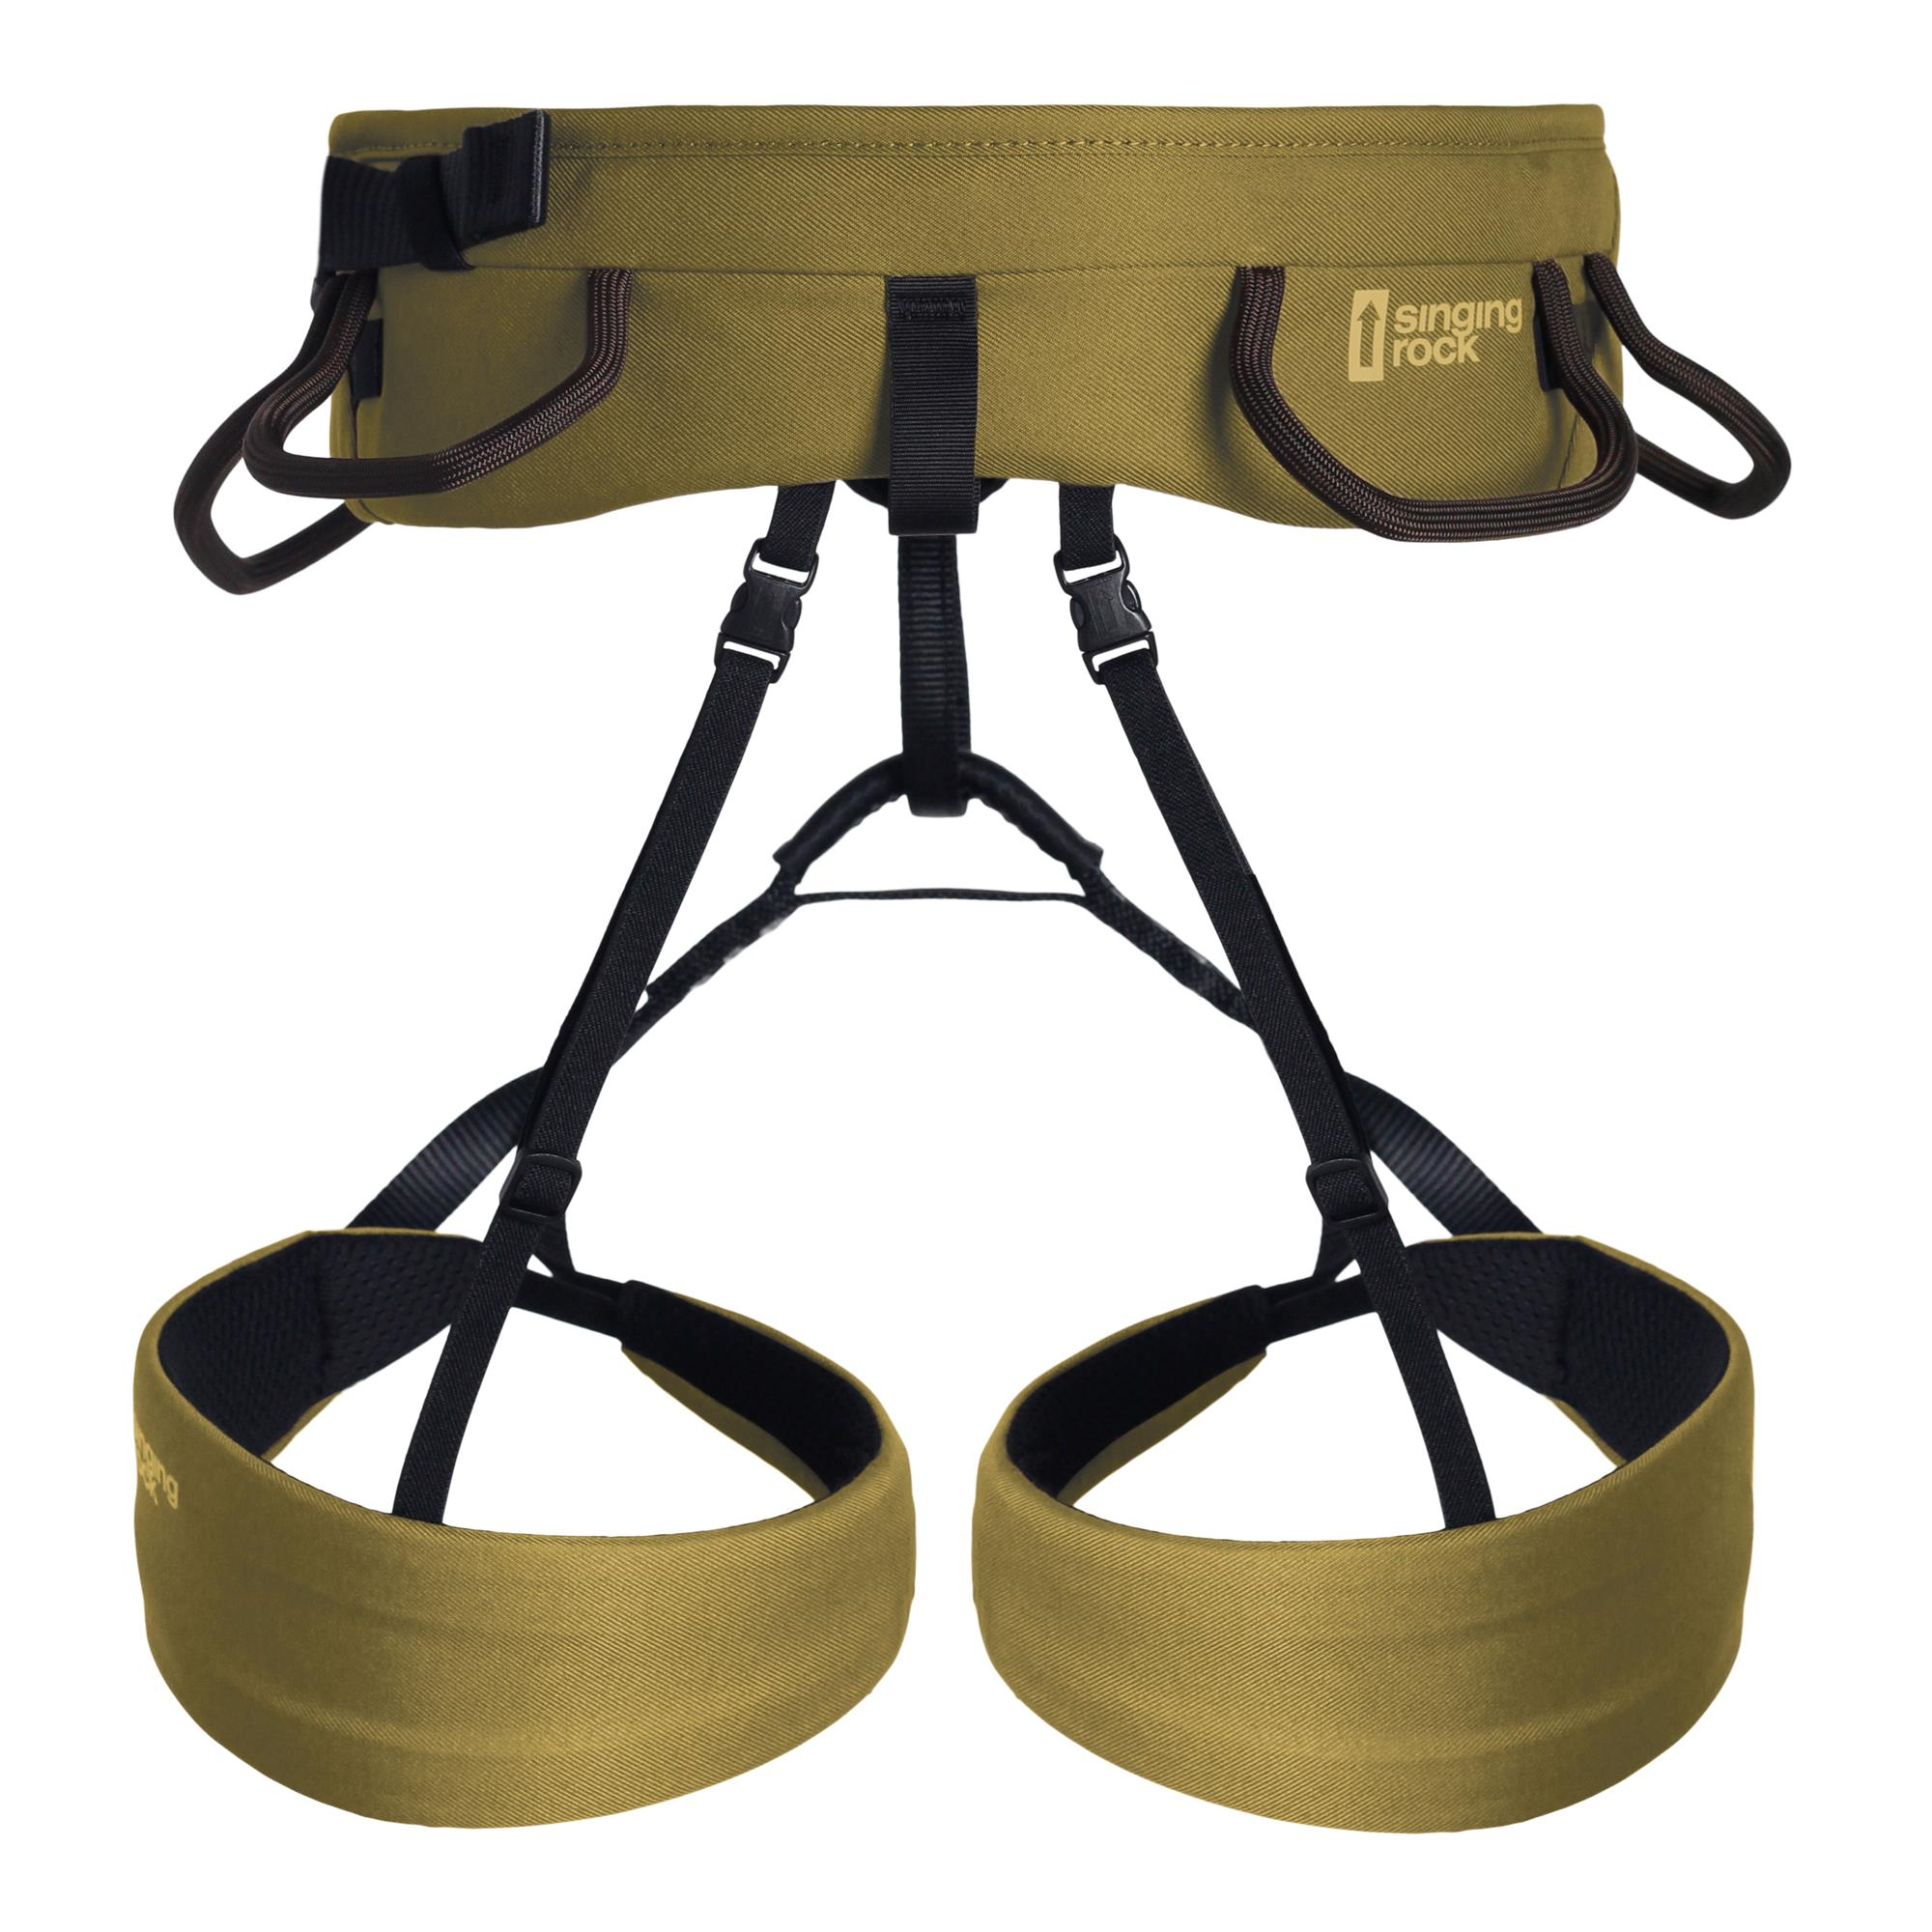 WALL - Harnesses for climbing